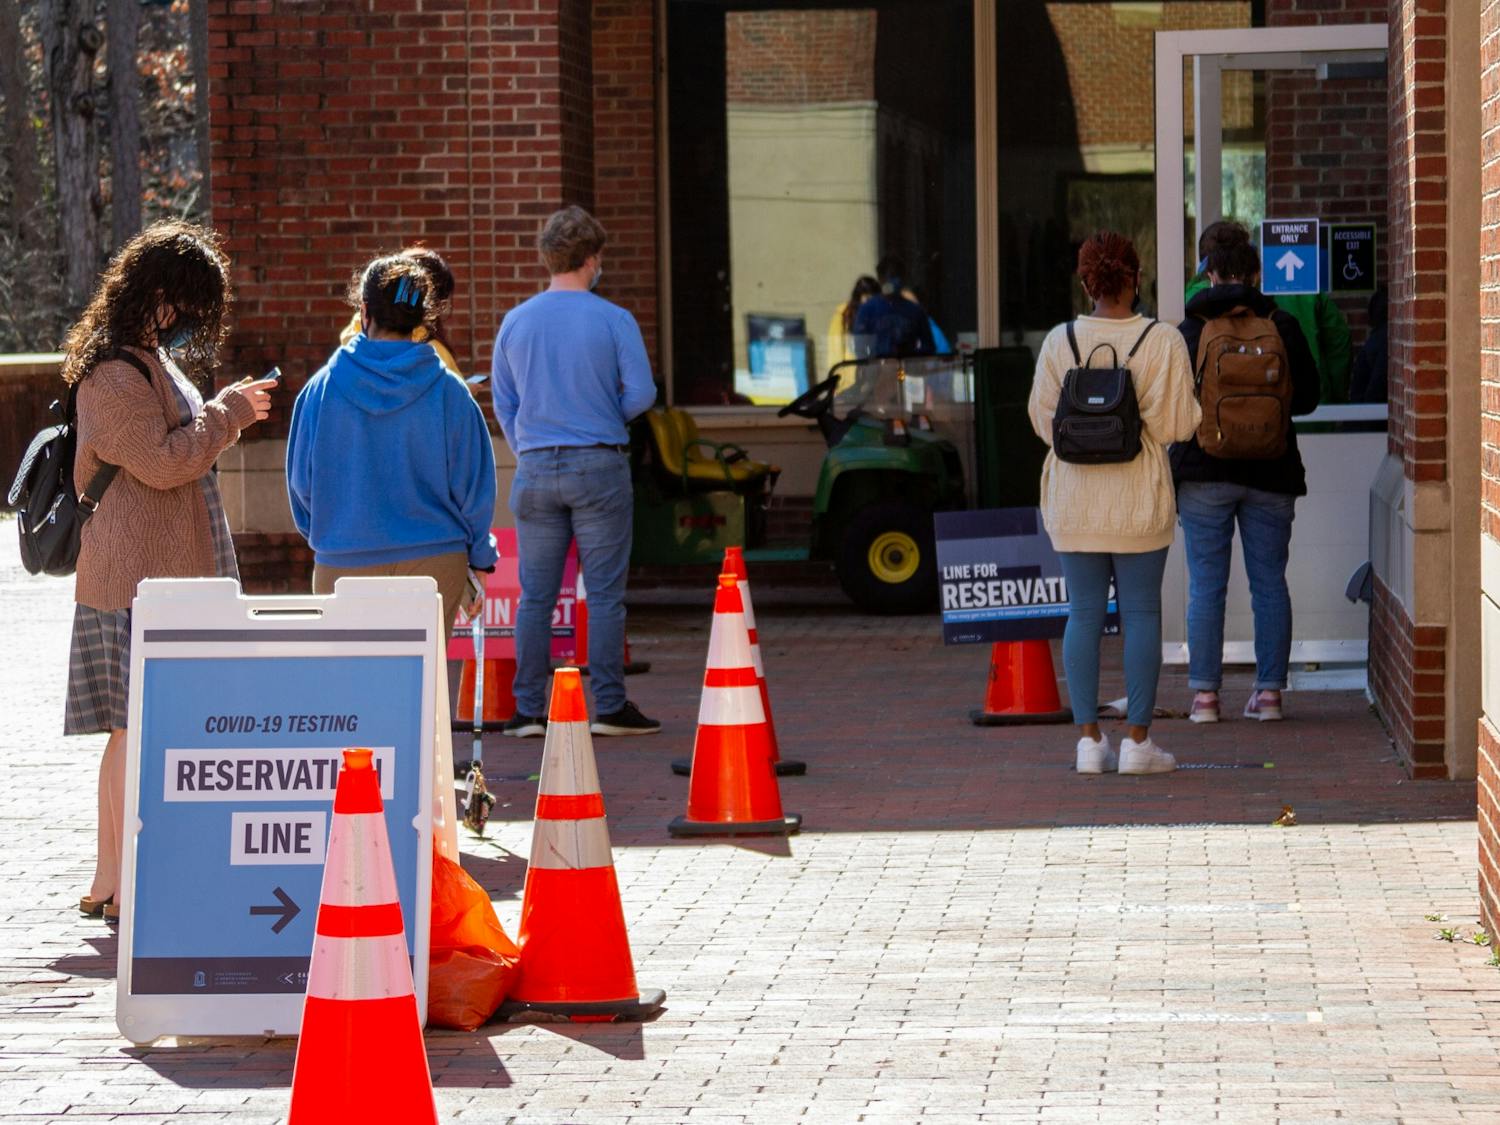 Students line up for COVID testing outside of UNC Rams Head Recreation Center on Tuesday, Feb. 16, 2021.